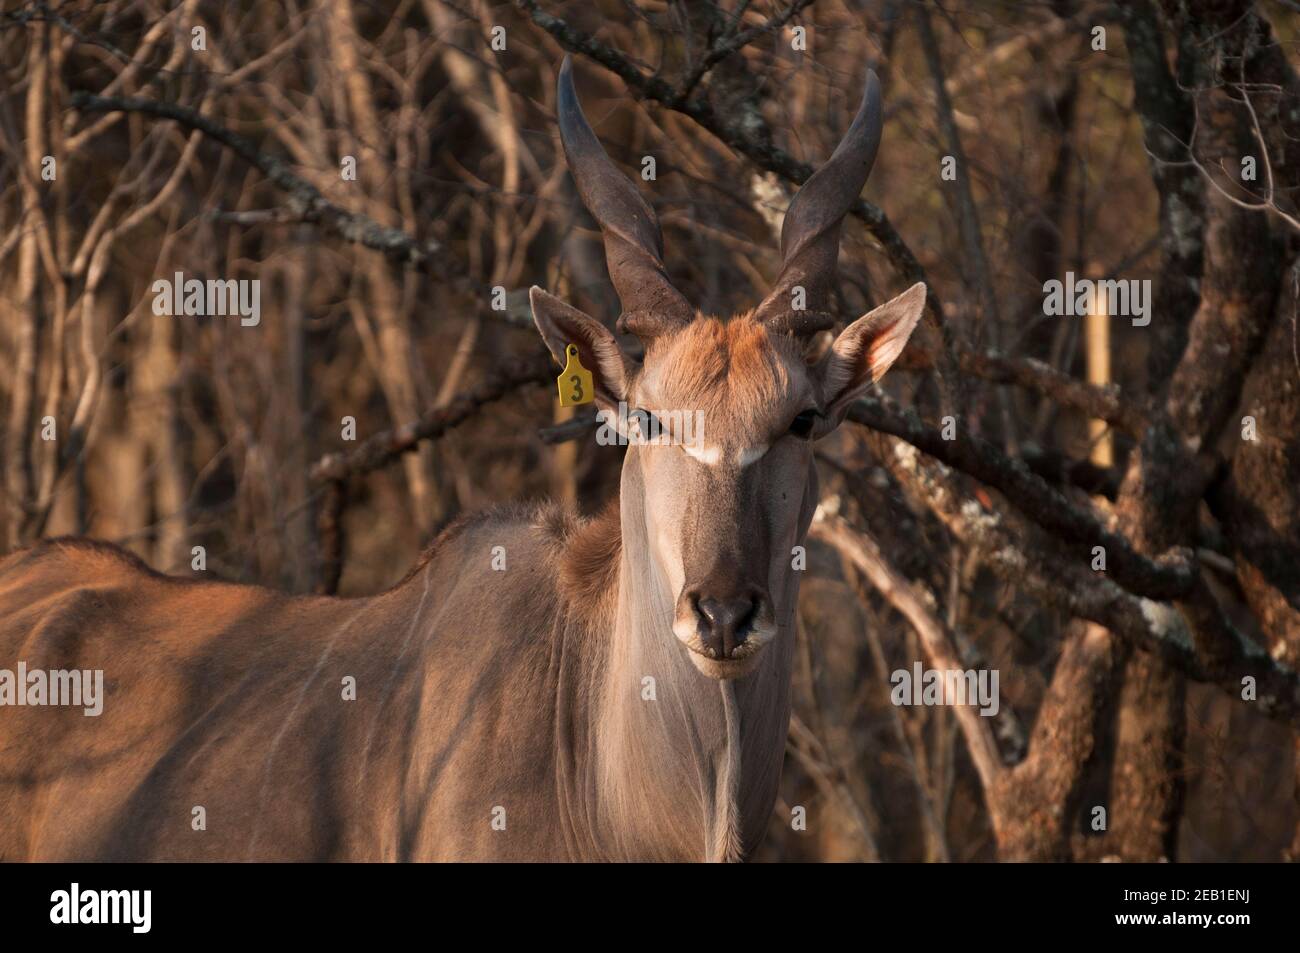 A Livingstone's Eland at a wildlife ranch near Melkrivier, Limpopo Province, South Africa. Livingstone's Eland, a subspecies of Common Eland, are not Stock Photo